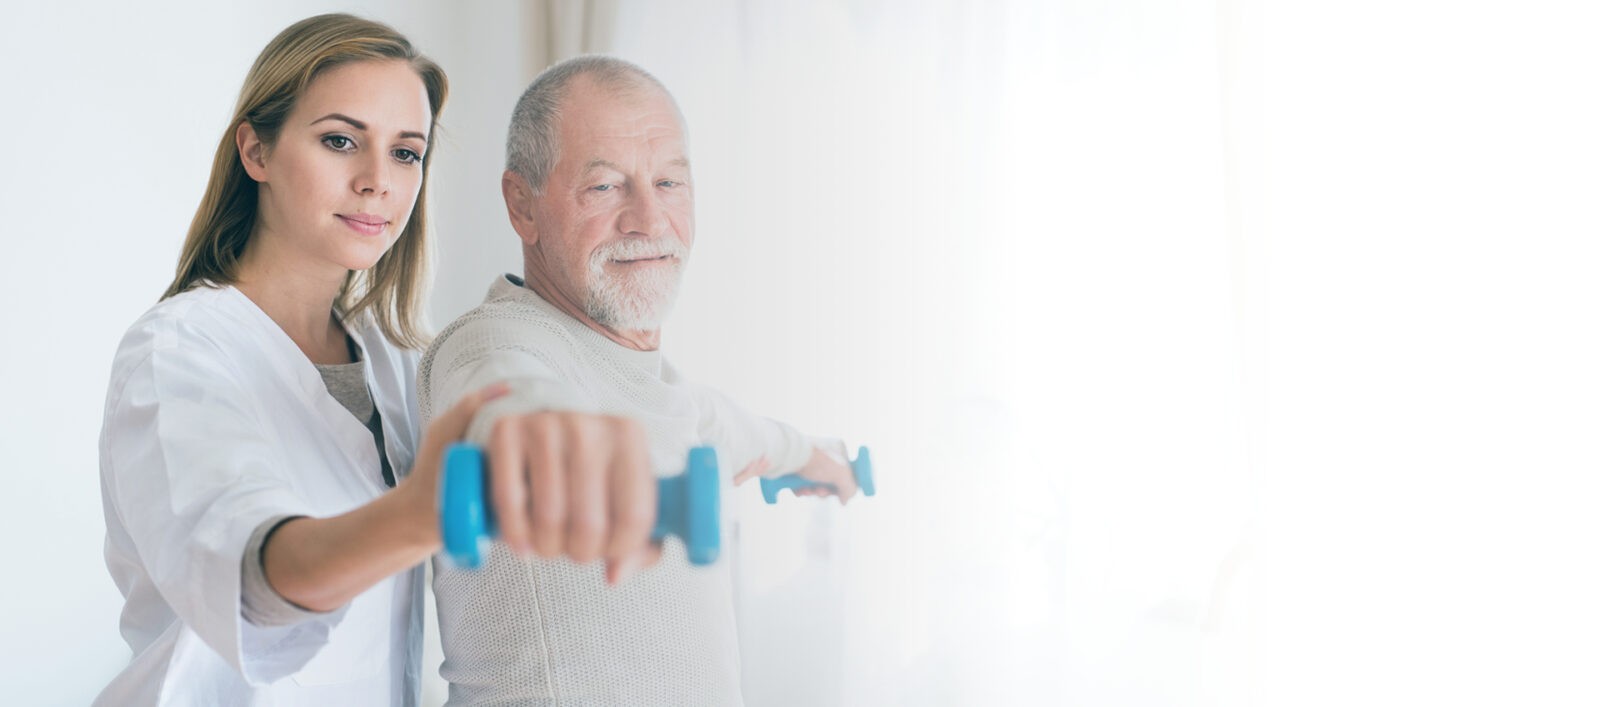 Female Home Caregiver Helps Elderly Man With Dumbell Training